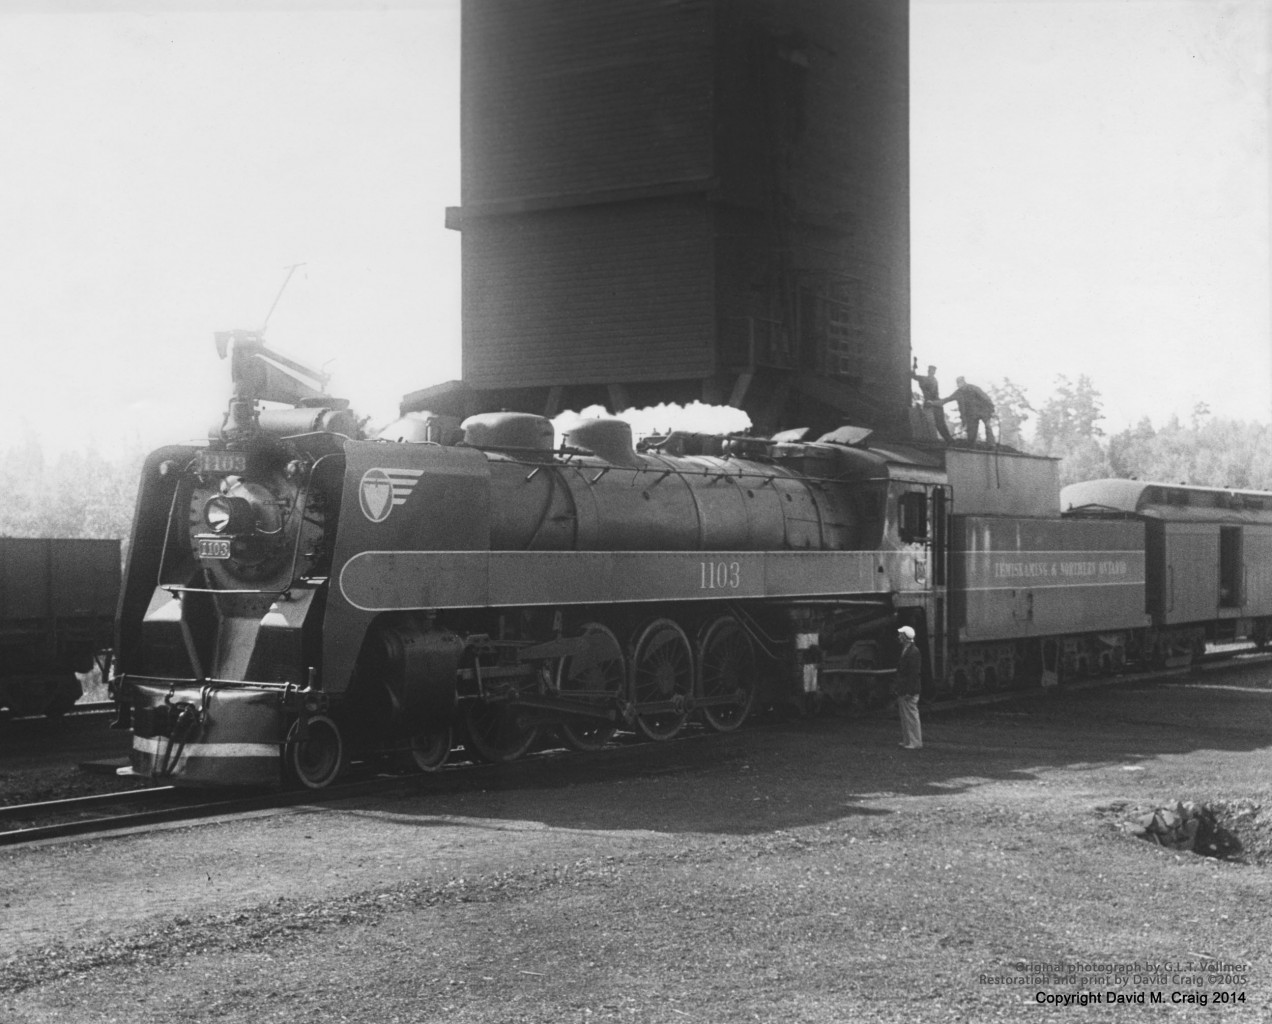 four engines, 1100-1103, were lightweight as 4-8-4s go, built by CLC in 1936-37. They powered the railway's Northland passenger train between North Bay and Cochrane, Ontario. None survived.
This photograph was is poor condition when originally restored the old fashioned way in the darkroom back in the '70s. Latest restoration is done digitally with photoshop. Hope you like it. 
High quality Giclee prints available by contacting me at Historypix@cogeco.ca